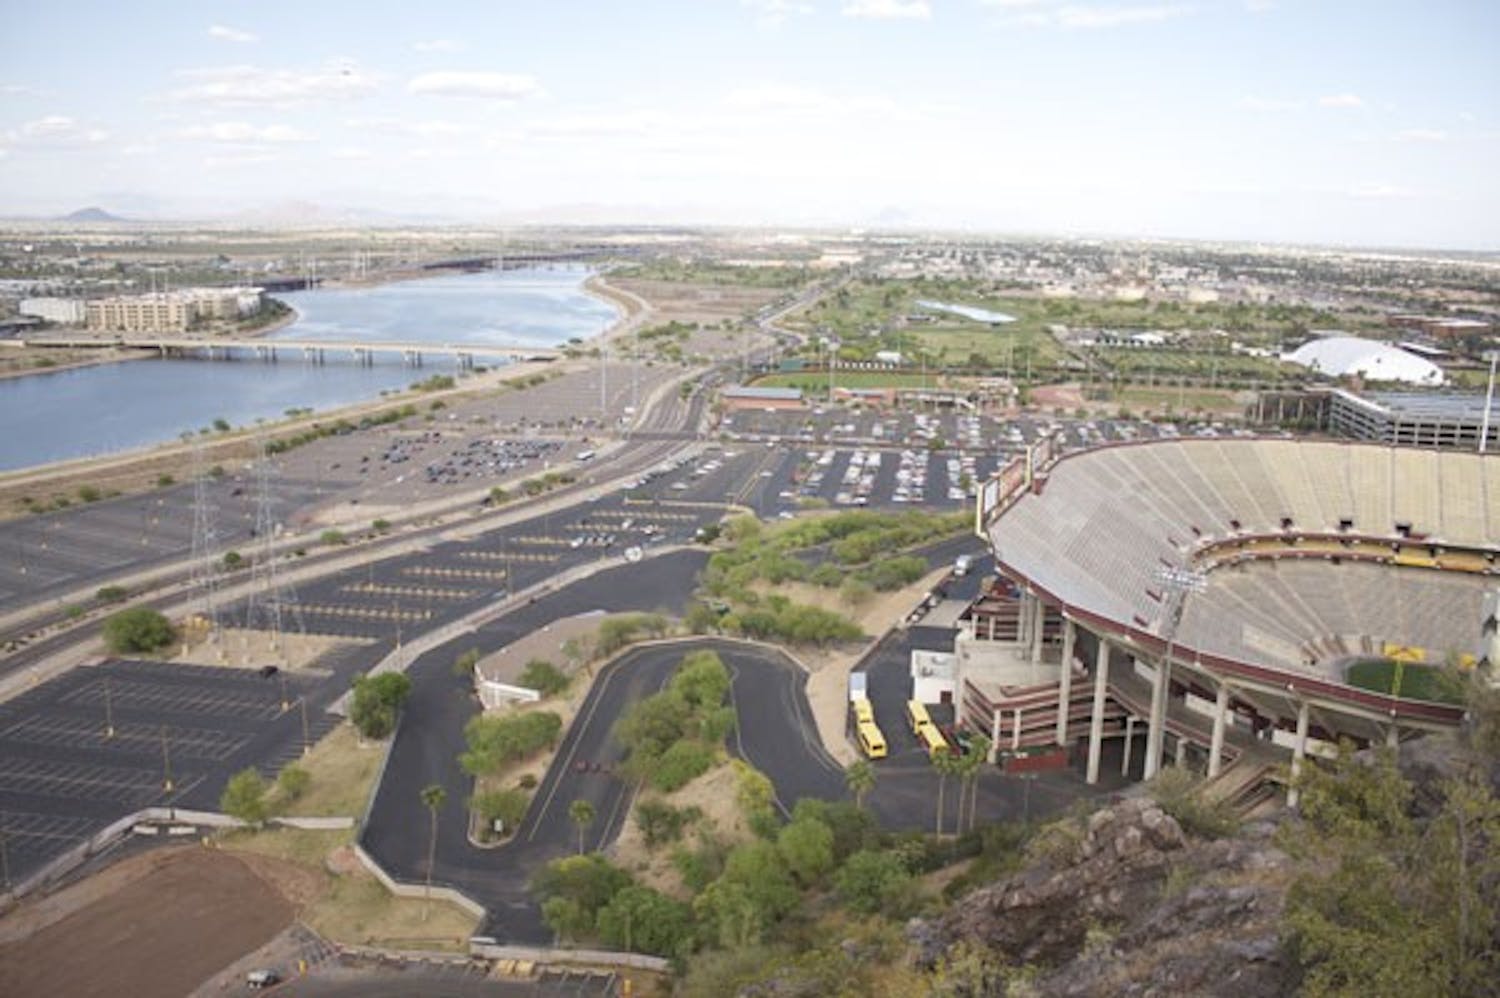 KING OF THE MOUNTAIN: A look at Lot 59 and Tempe Town Lake as seen from the top of "A" Mountain. (Photo by Scott Stuk)